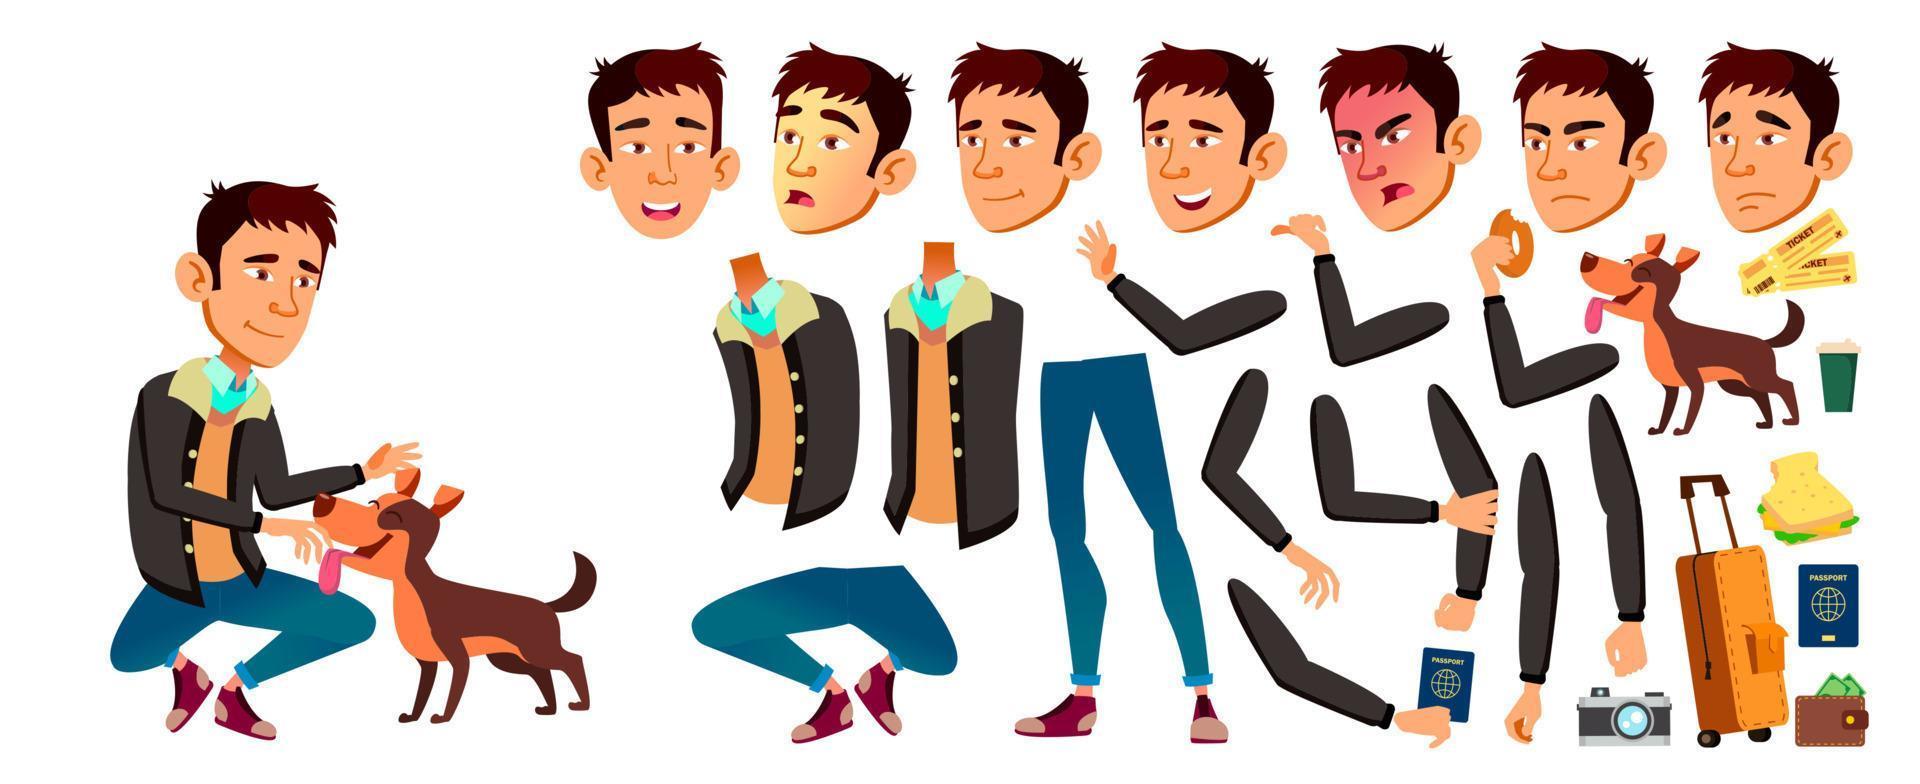 Teen Boy Vector. Animation Creation Set. Face Emotions, Gestures. Beauty, Lifestyle. Animated. For Web, Brochure, Poster Design. Isolated Cartoon Illustration vector